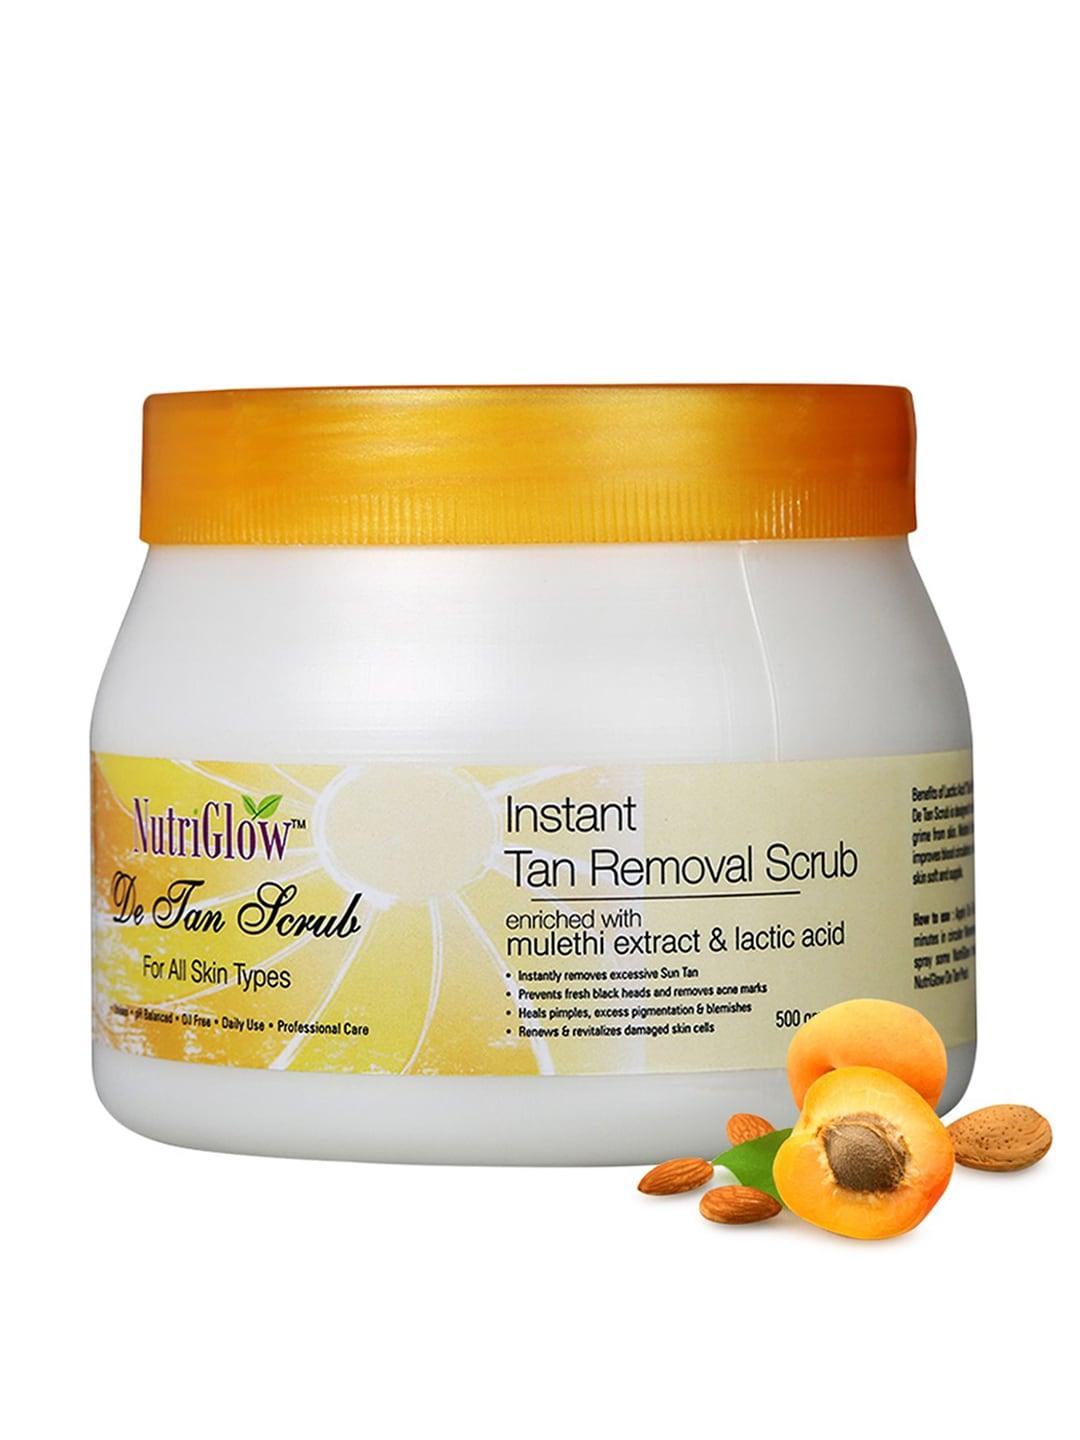 NutriGlow Sustainable Instant Tan Removal De Tan Scrub with Mulethi Extract & Lactic Acid - 500 g